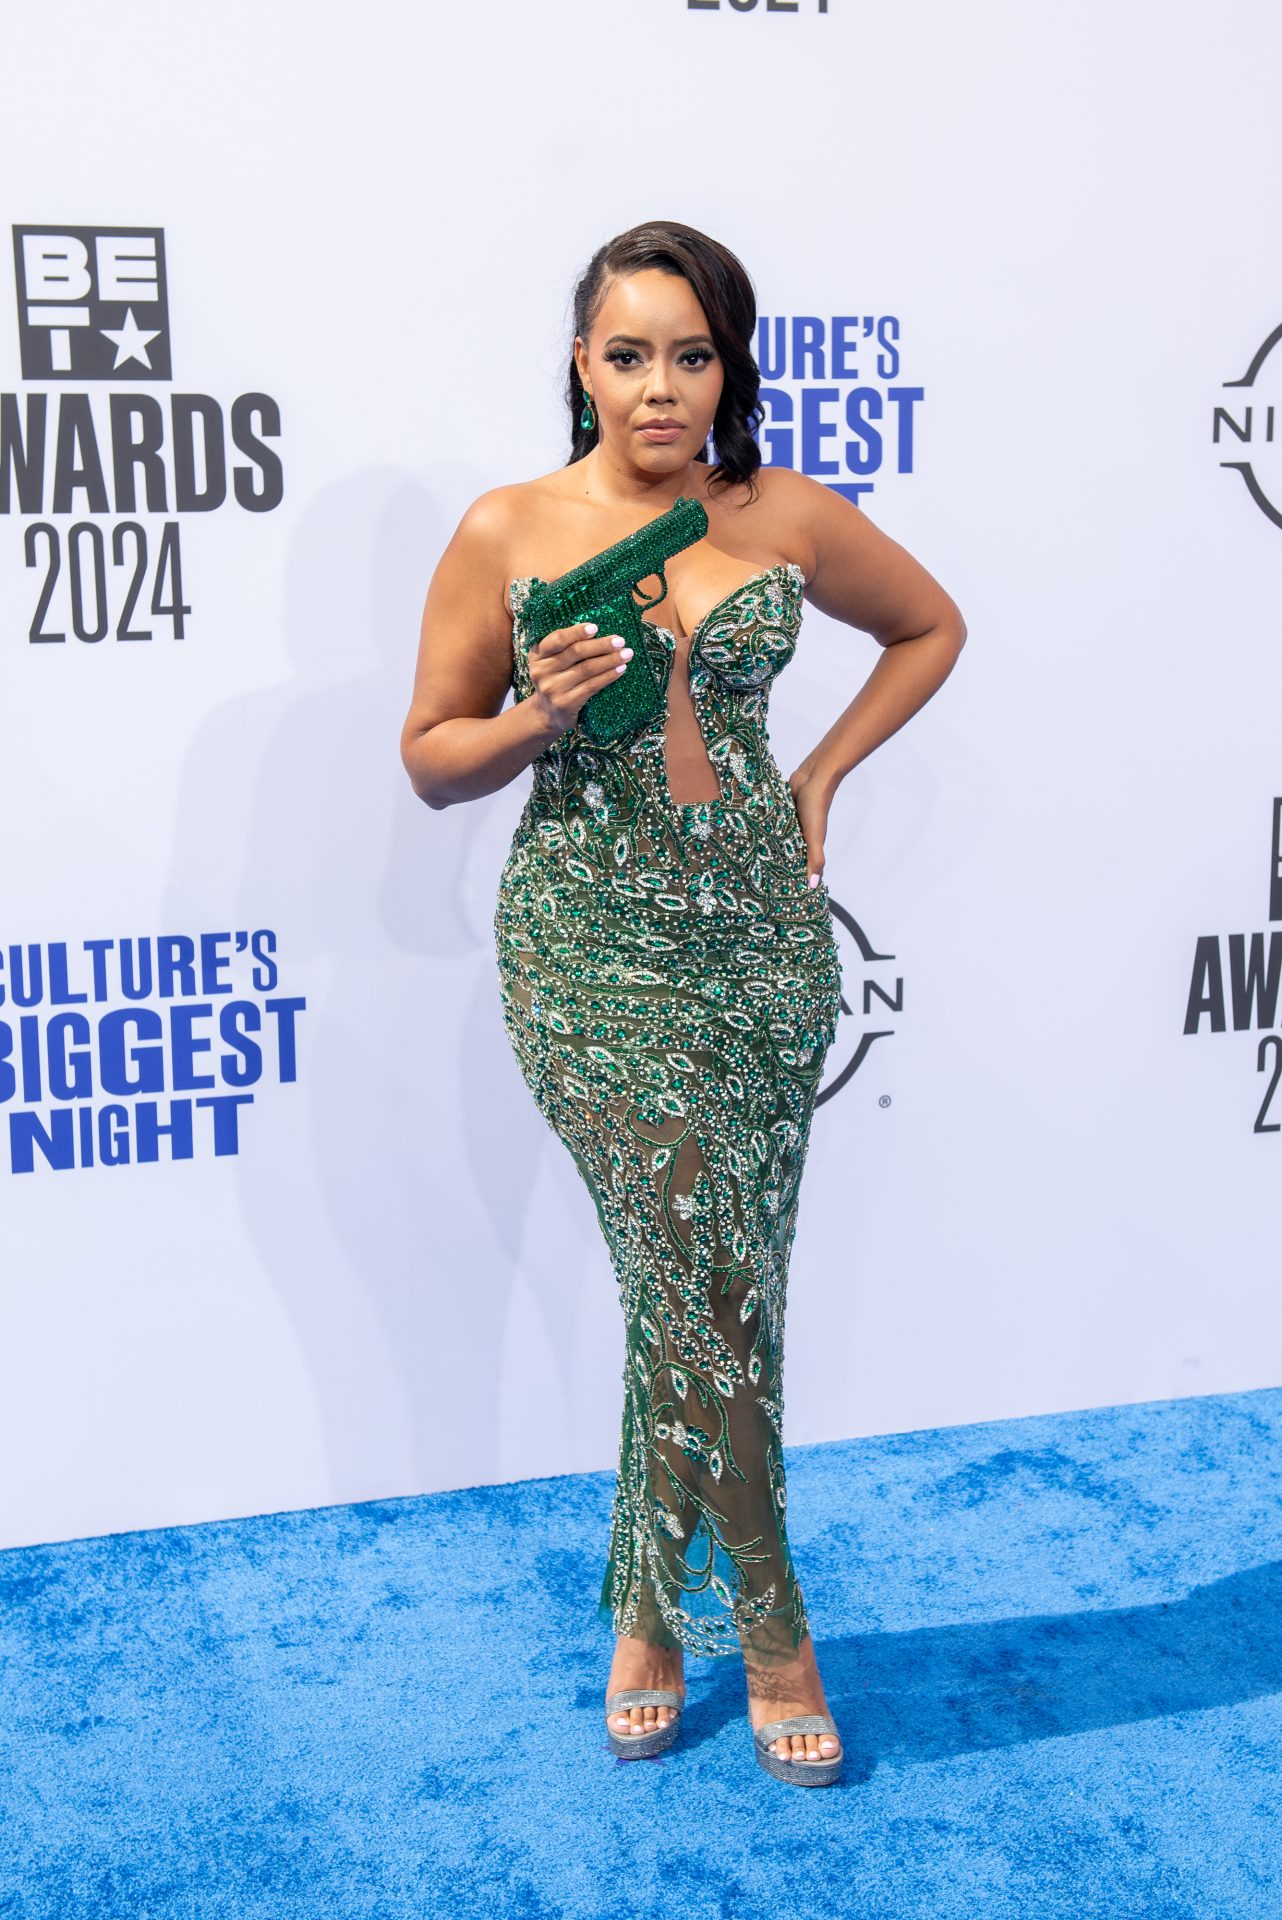 Angela Simmons Issues Second Apology for Gun-Shaped Purse at BET Awards (PHOTOS)